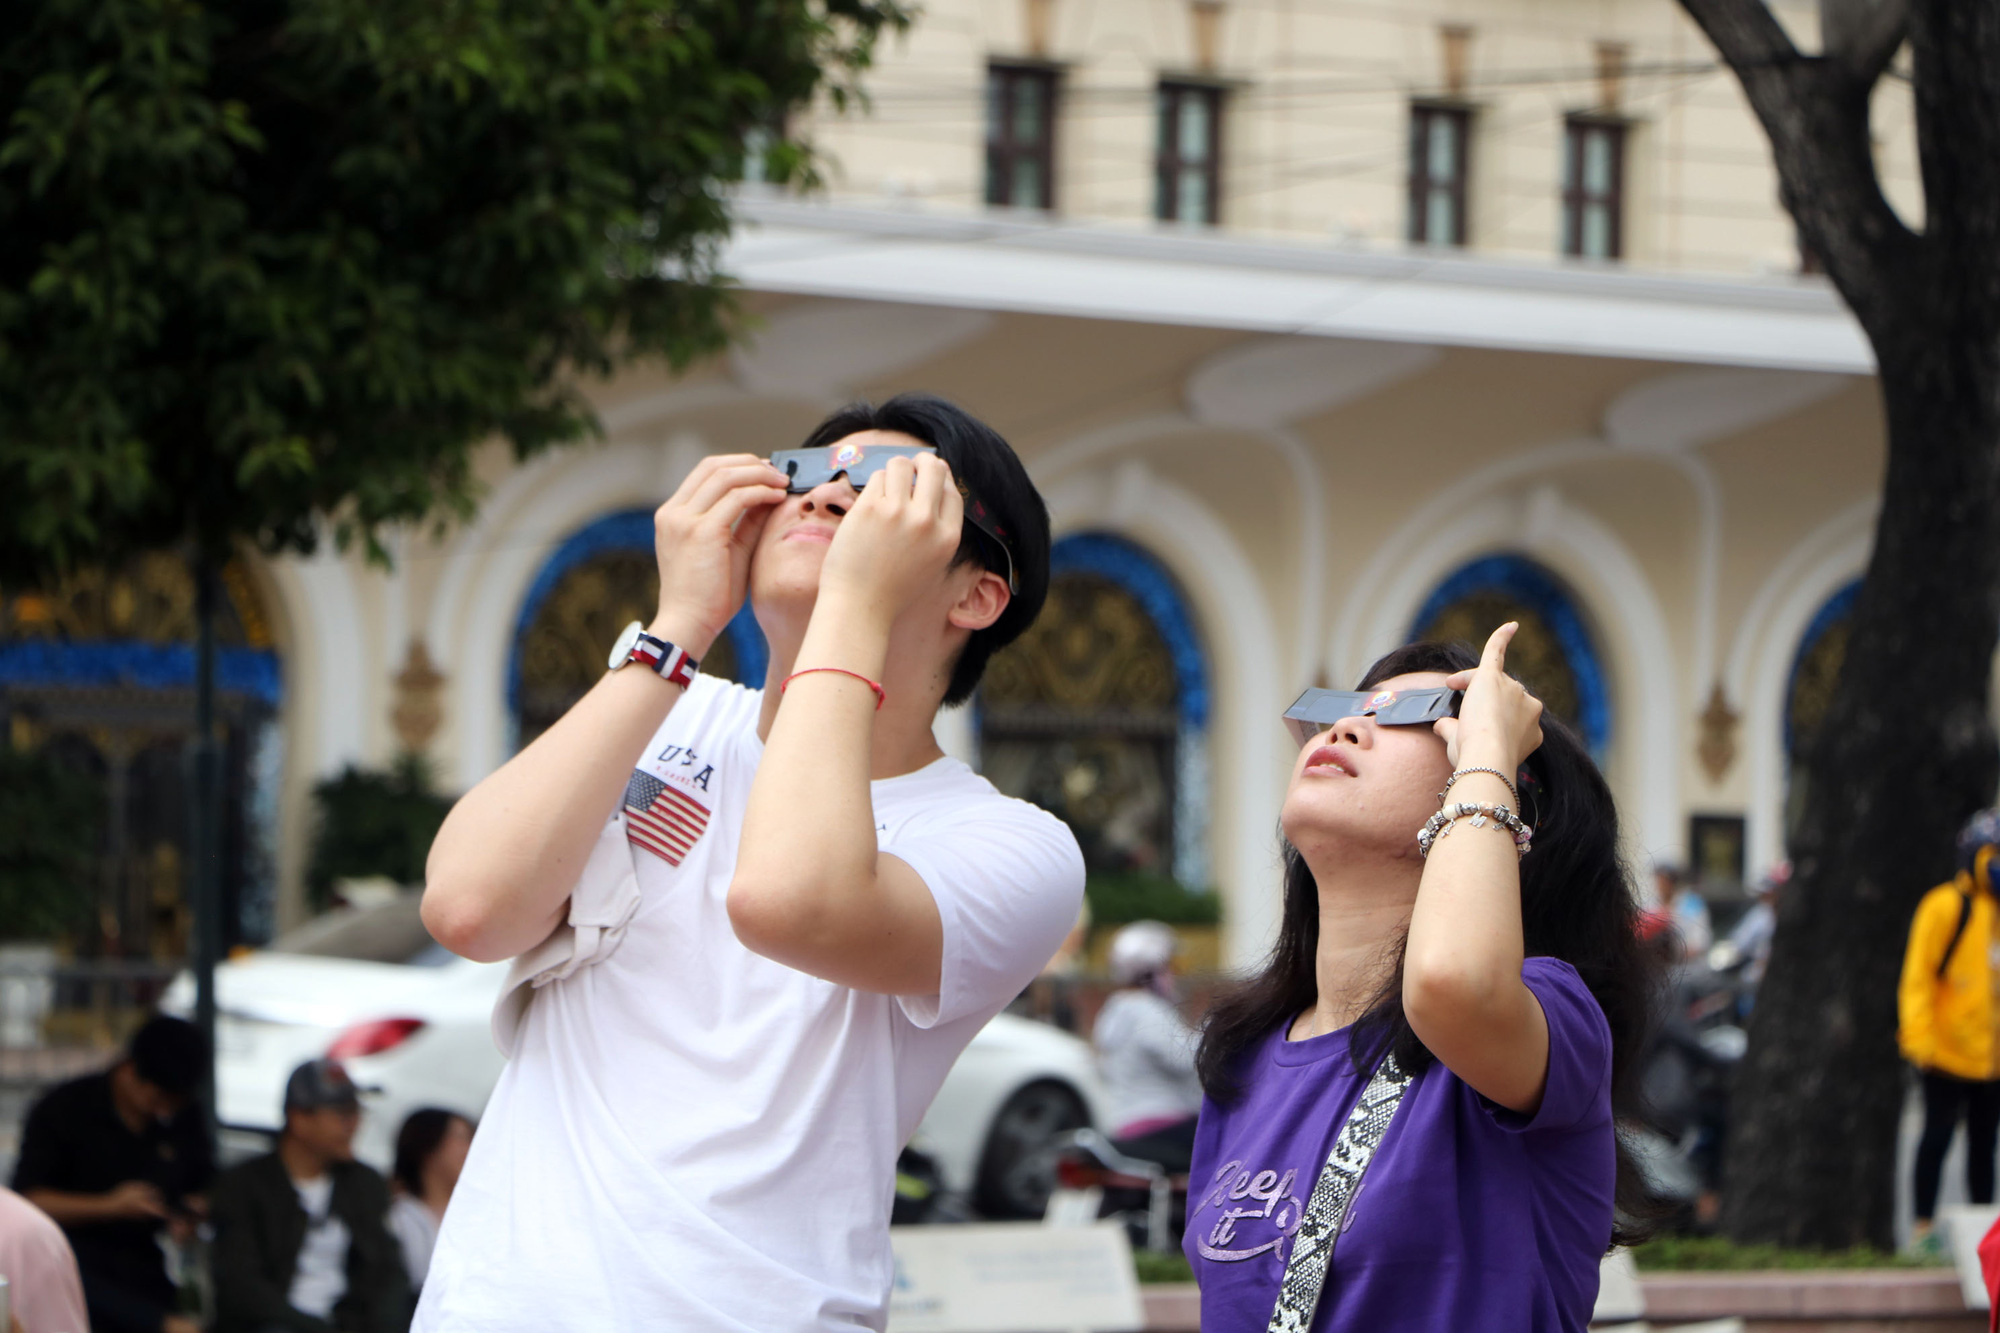 Ho Chi Minh City residents flock to see year’s last solar eclipse